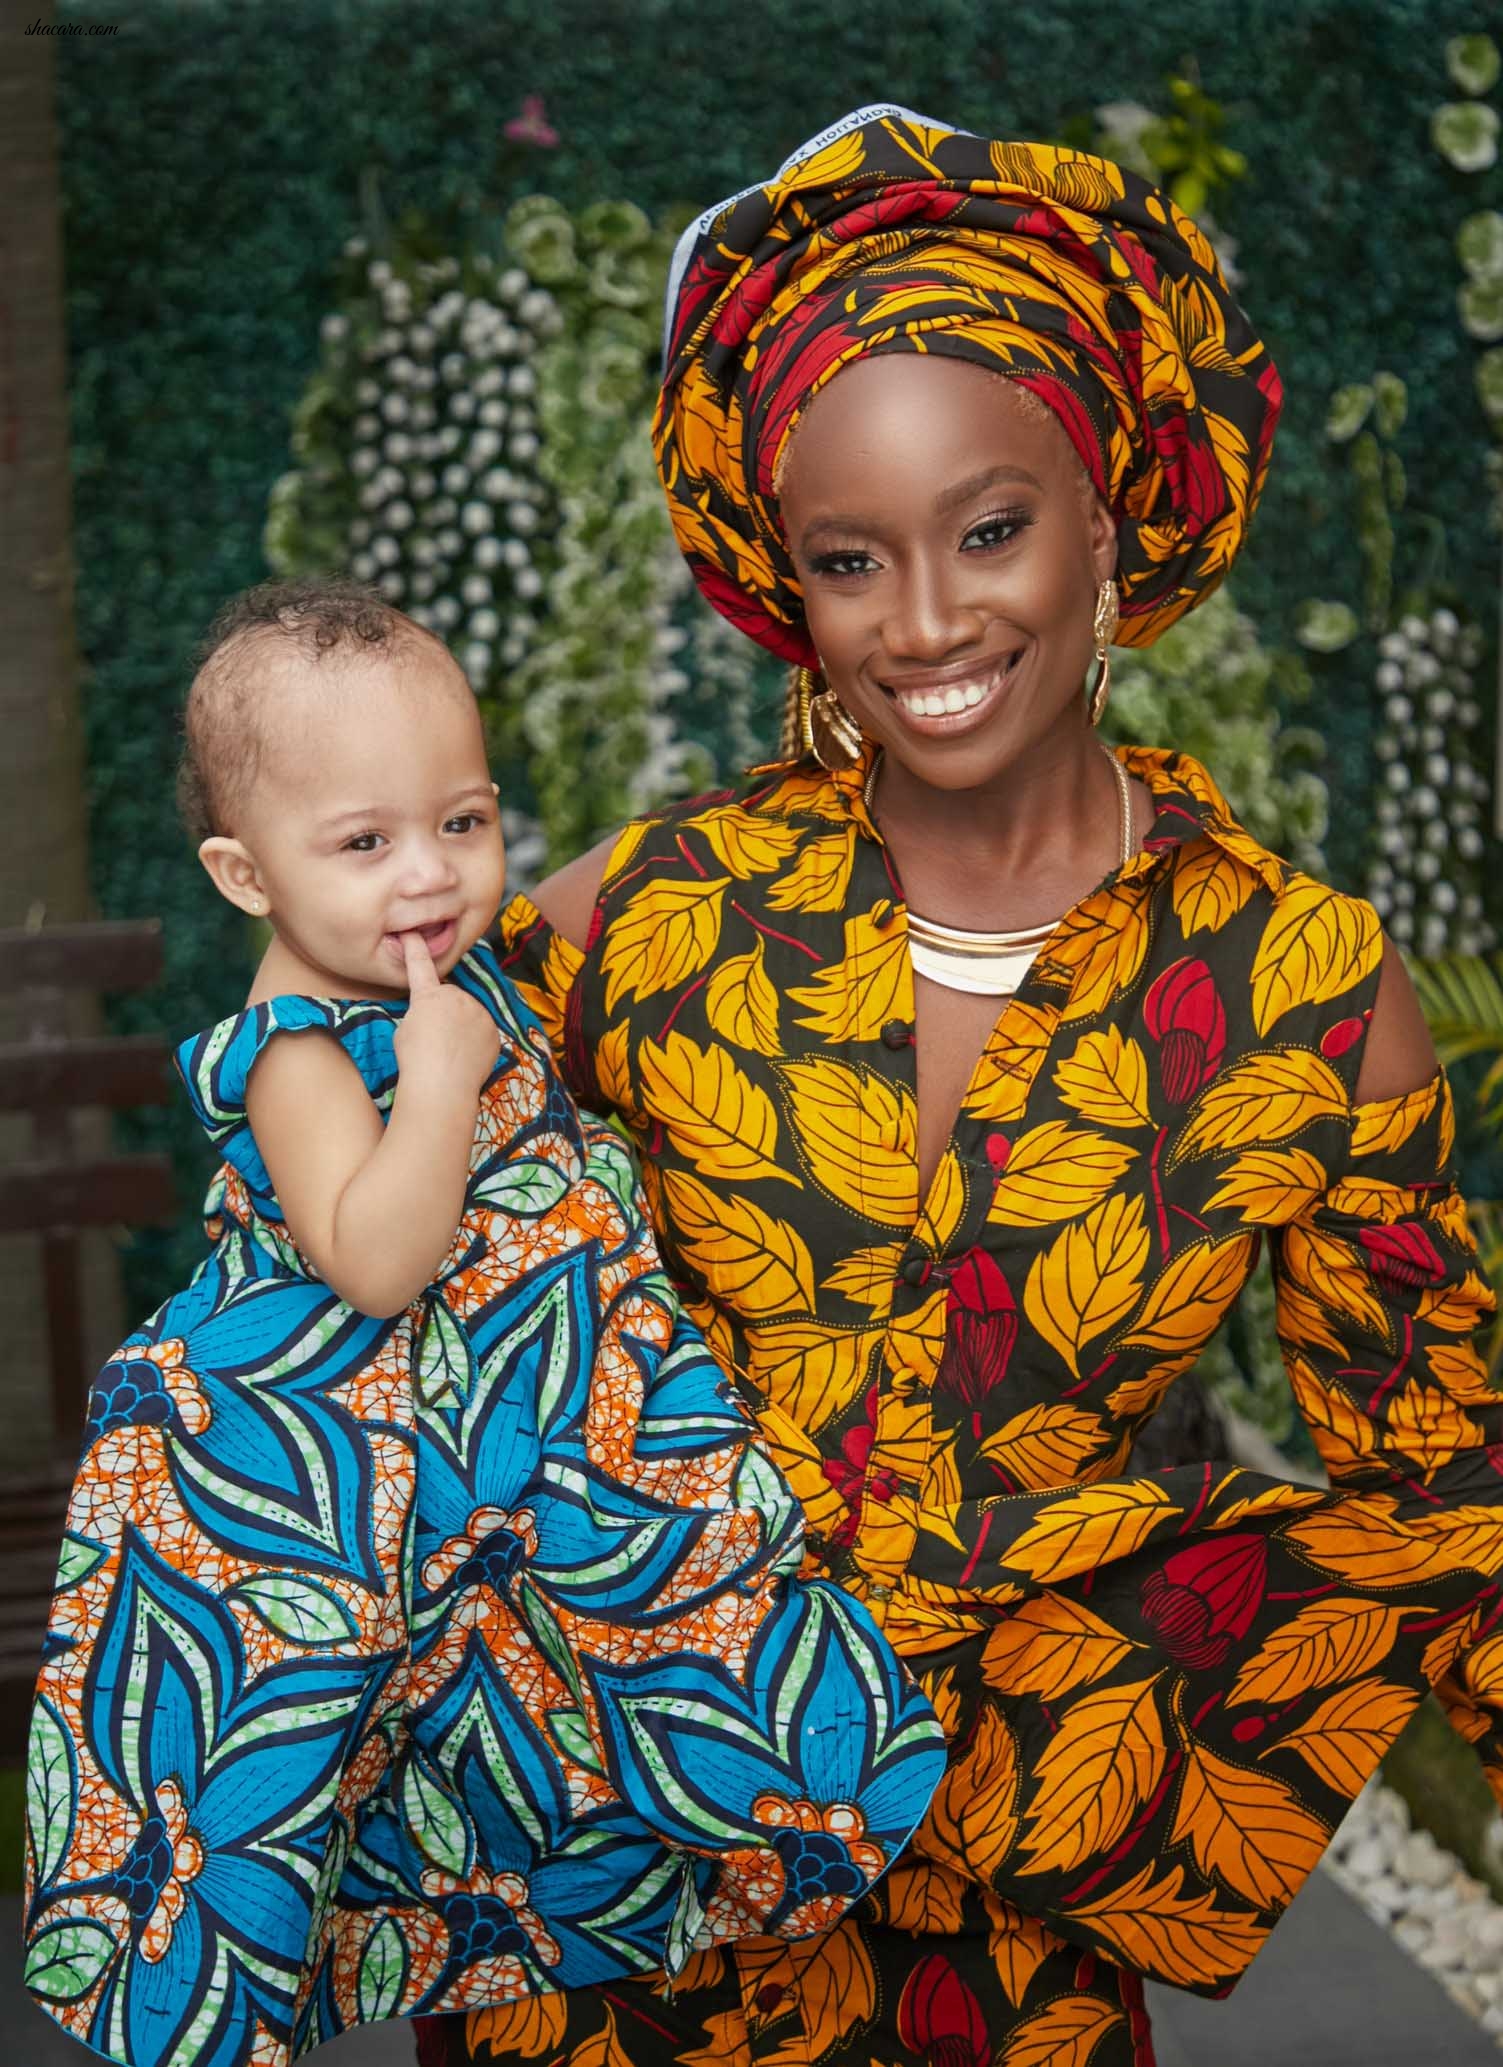 For The Love Of African Wax Print! Tania Omotayo, Juliana Olayede, Soliat Bada And Mariam Adeyemi Star In Glam Africa Magazine’s Latest Feature